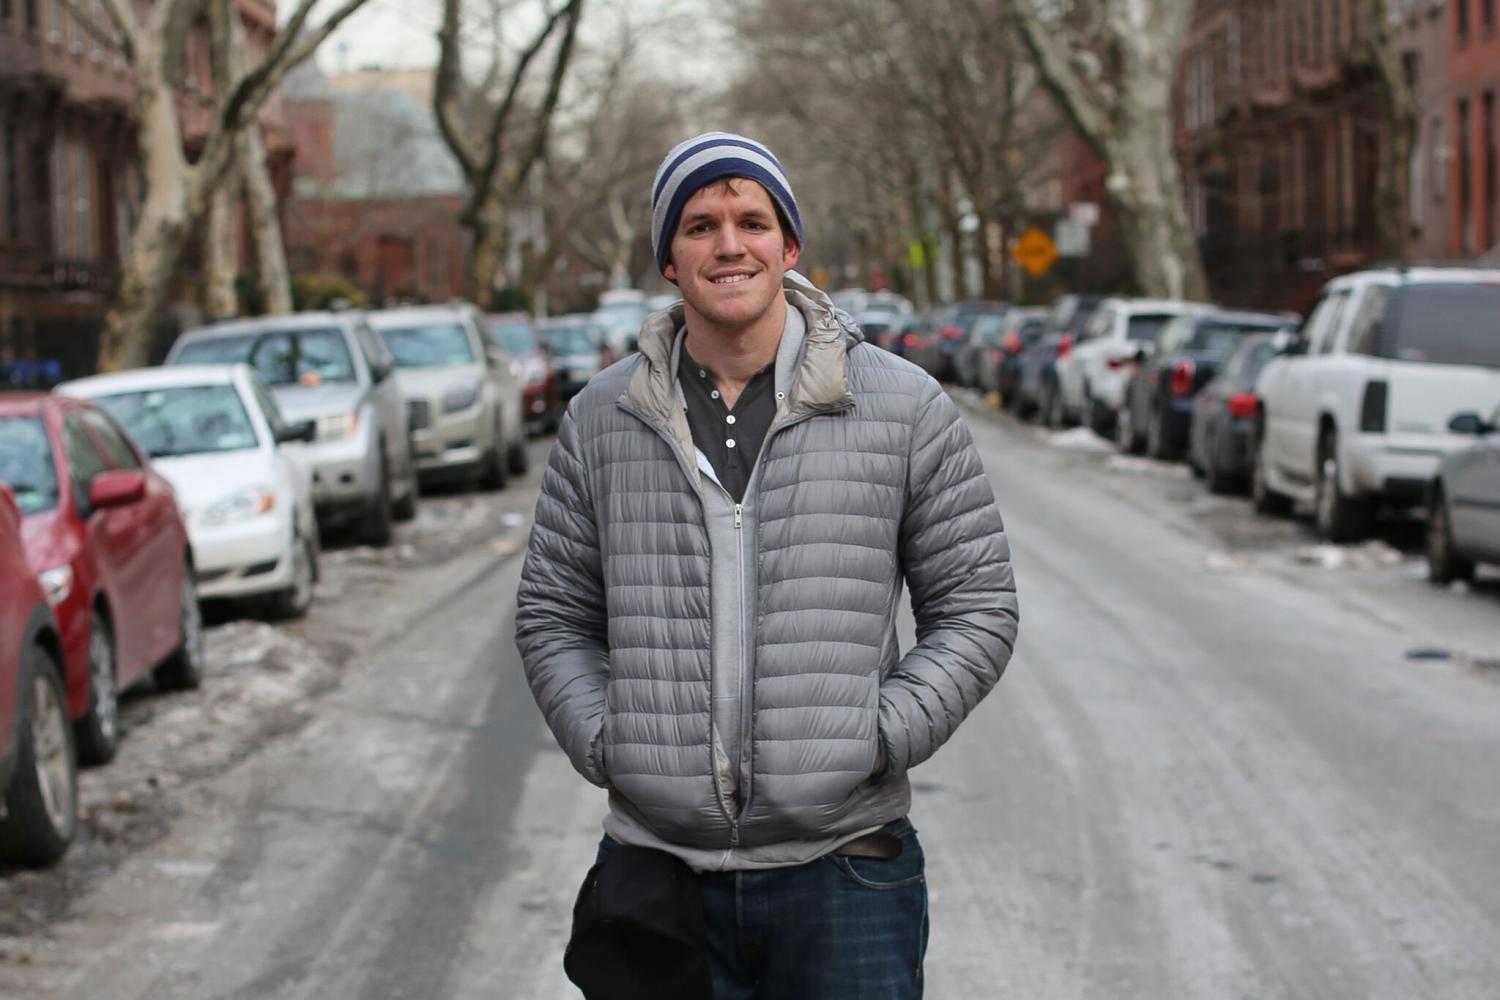 Brandon Stanton, the man behind the portraits on Humans of New York, is setting his sights on turning HONY into a docuseries.
